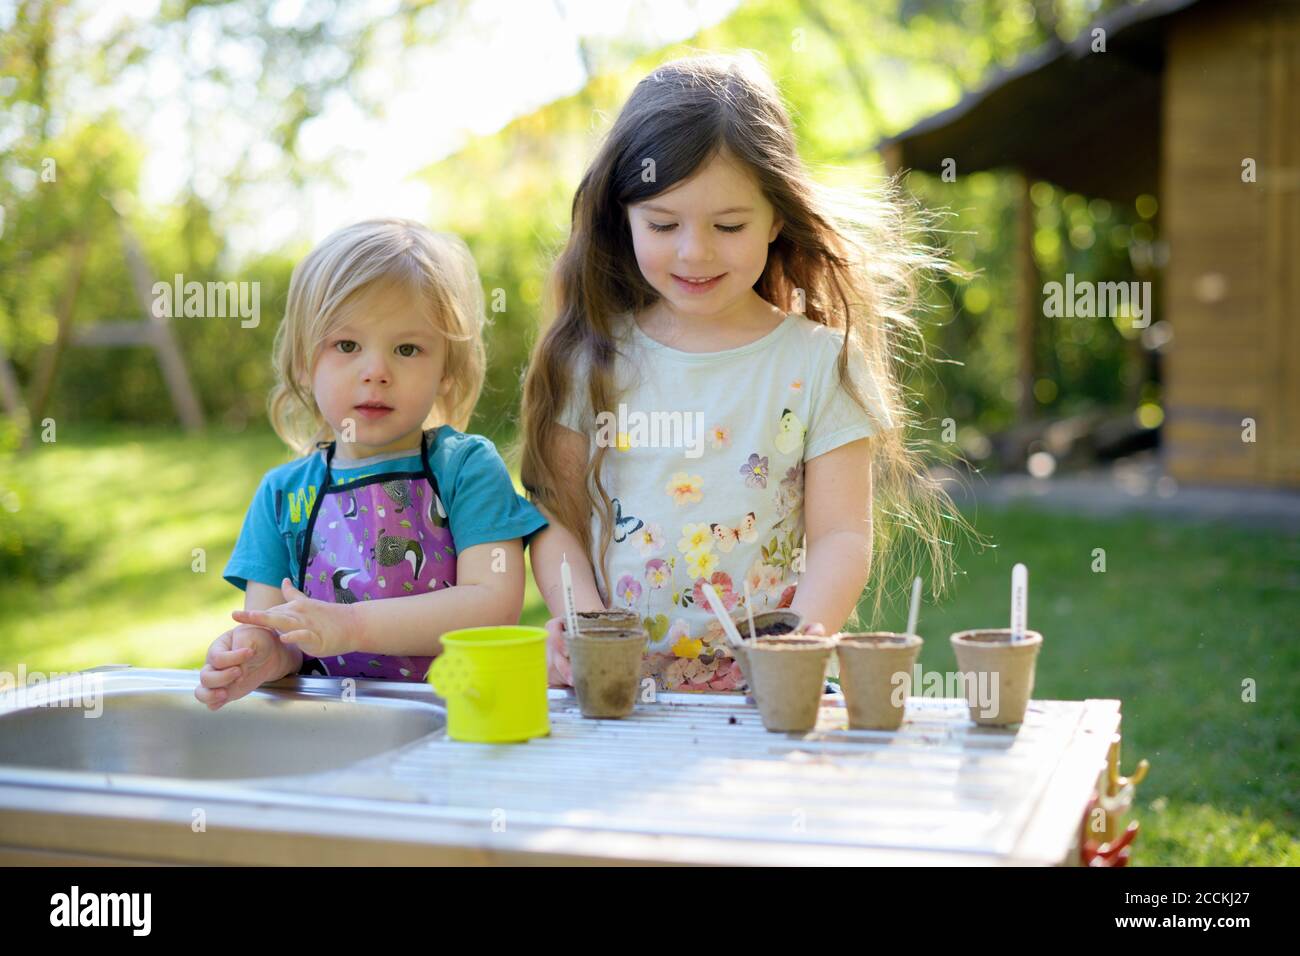 Cute girl standing with sister planting seeds in small pots on table at yard Stock Photo